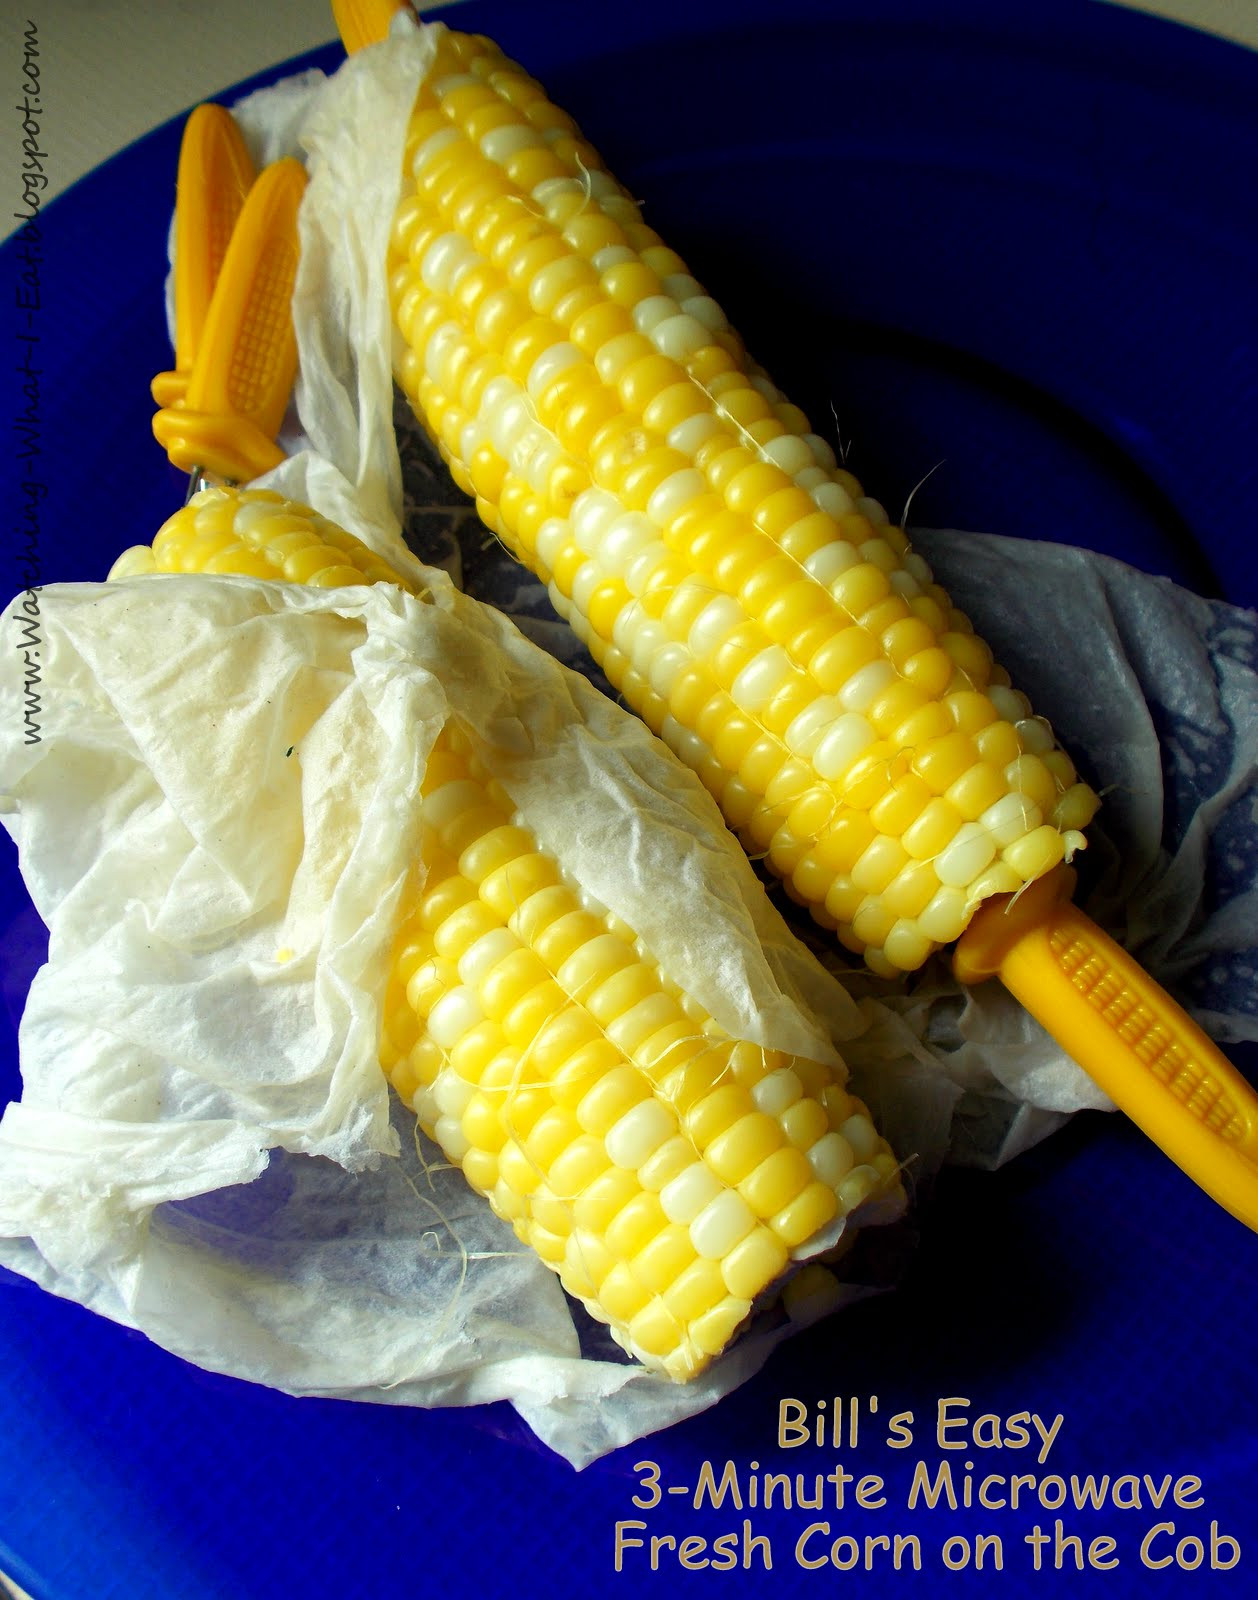 Corn On Cob In Microwave
 Watching What I Eat Bill s Easy 3 Minute Microwave Fresh